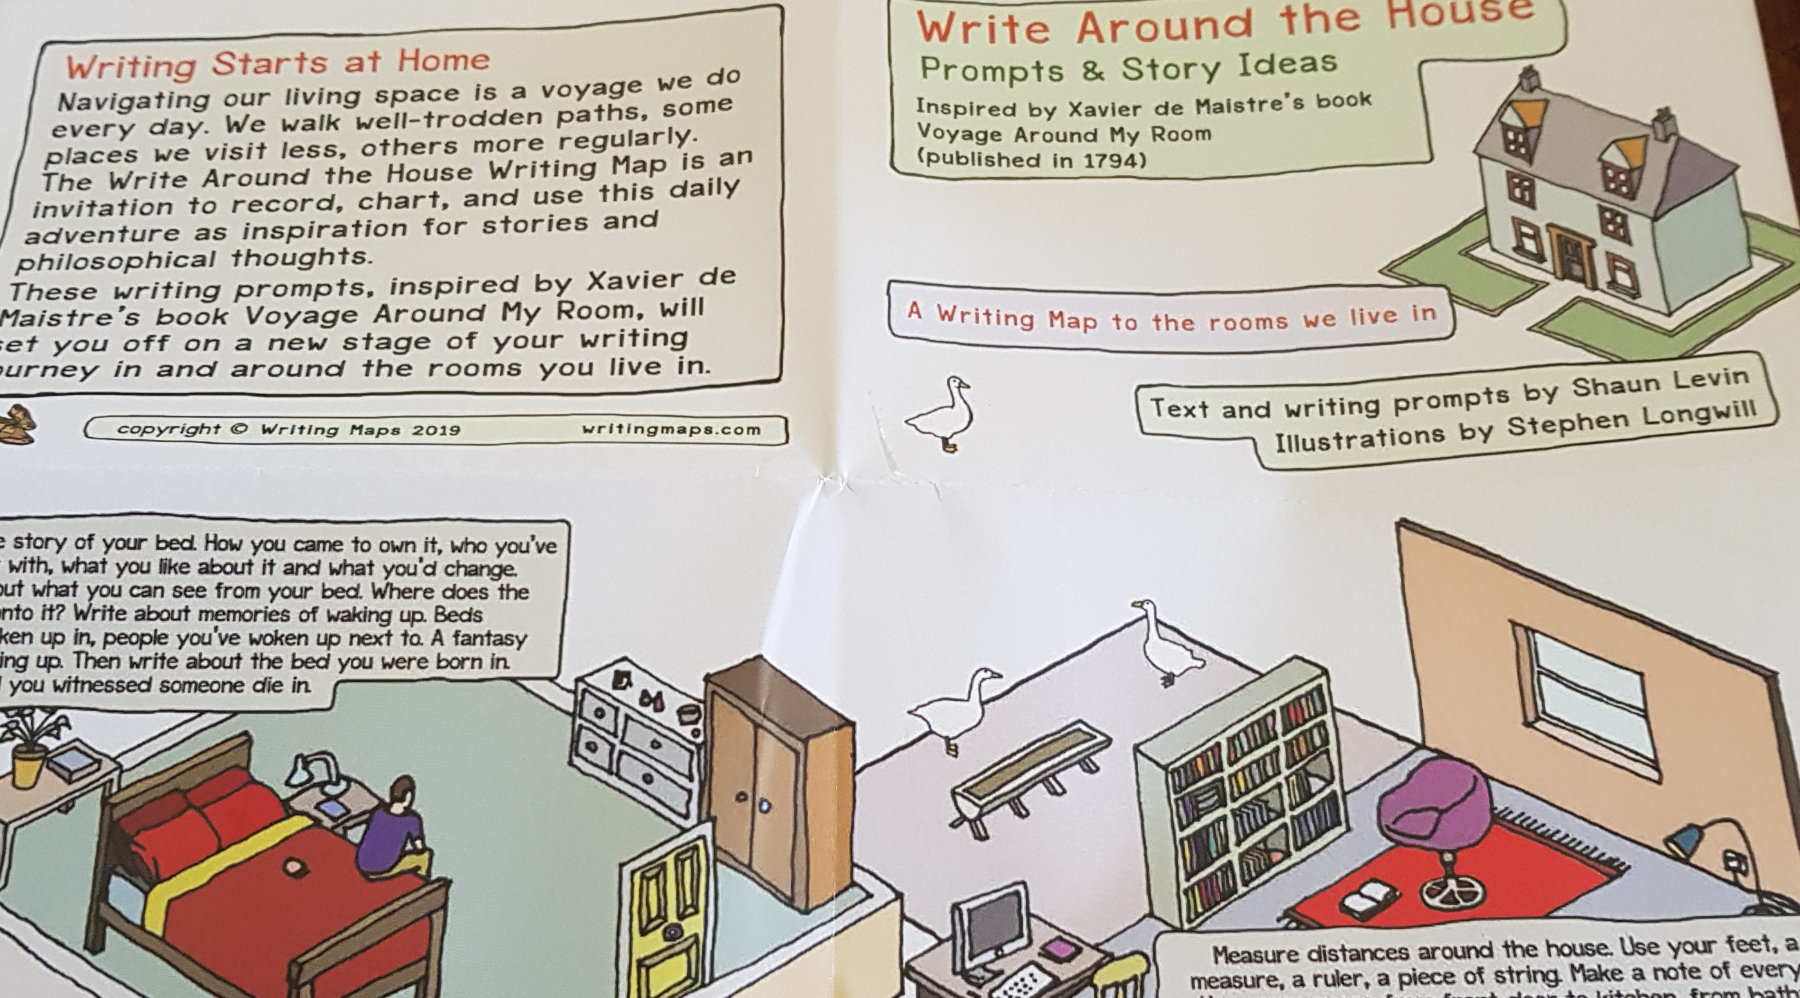 Write About the House by Writing Maps